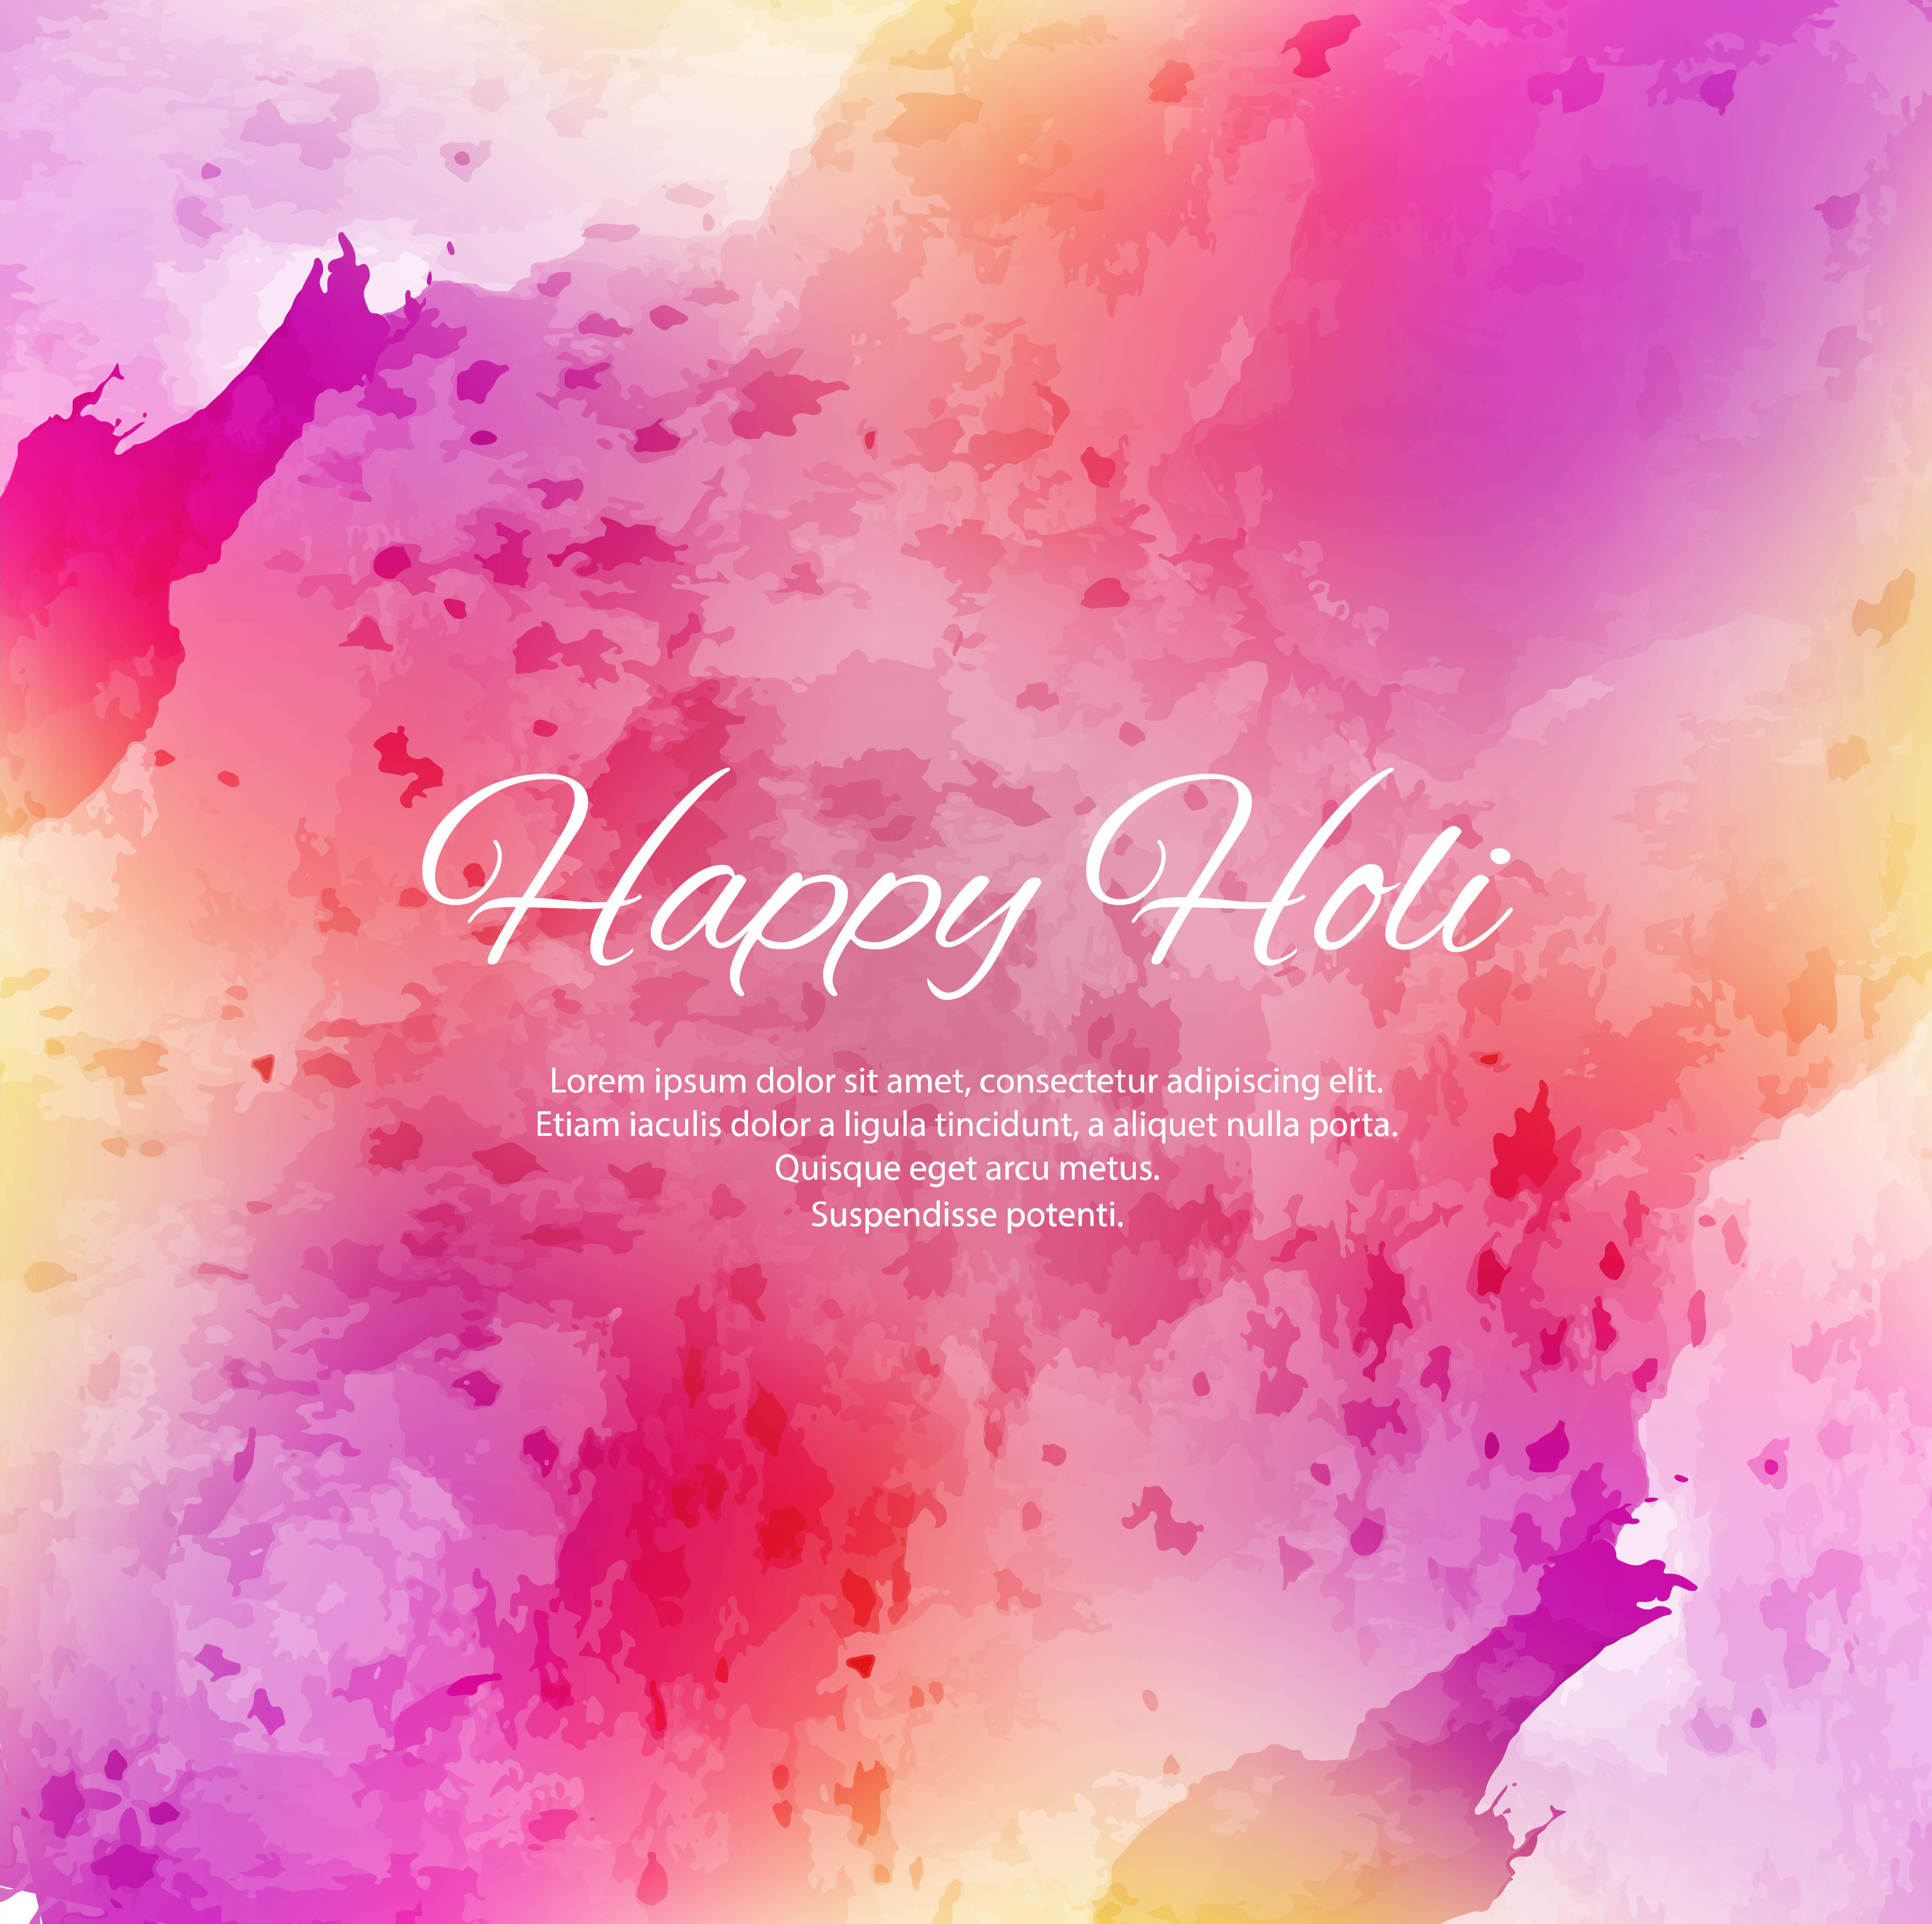 Illustration Of Abstract Colorful Happy Holi Background 244881 Vector